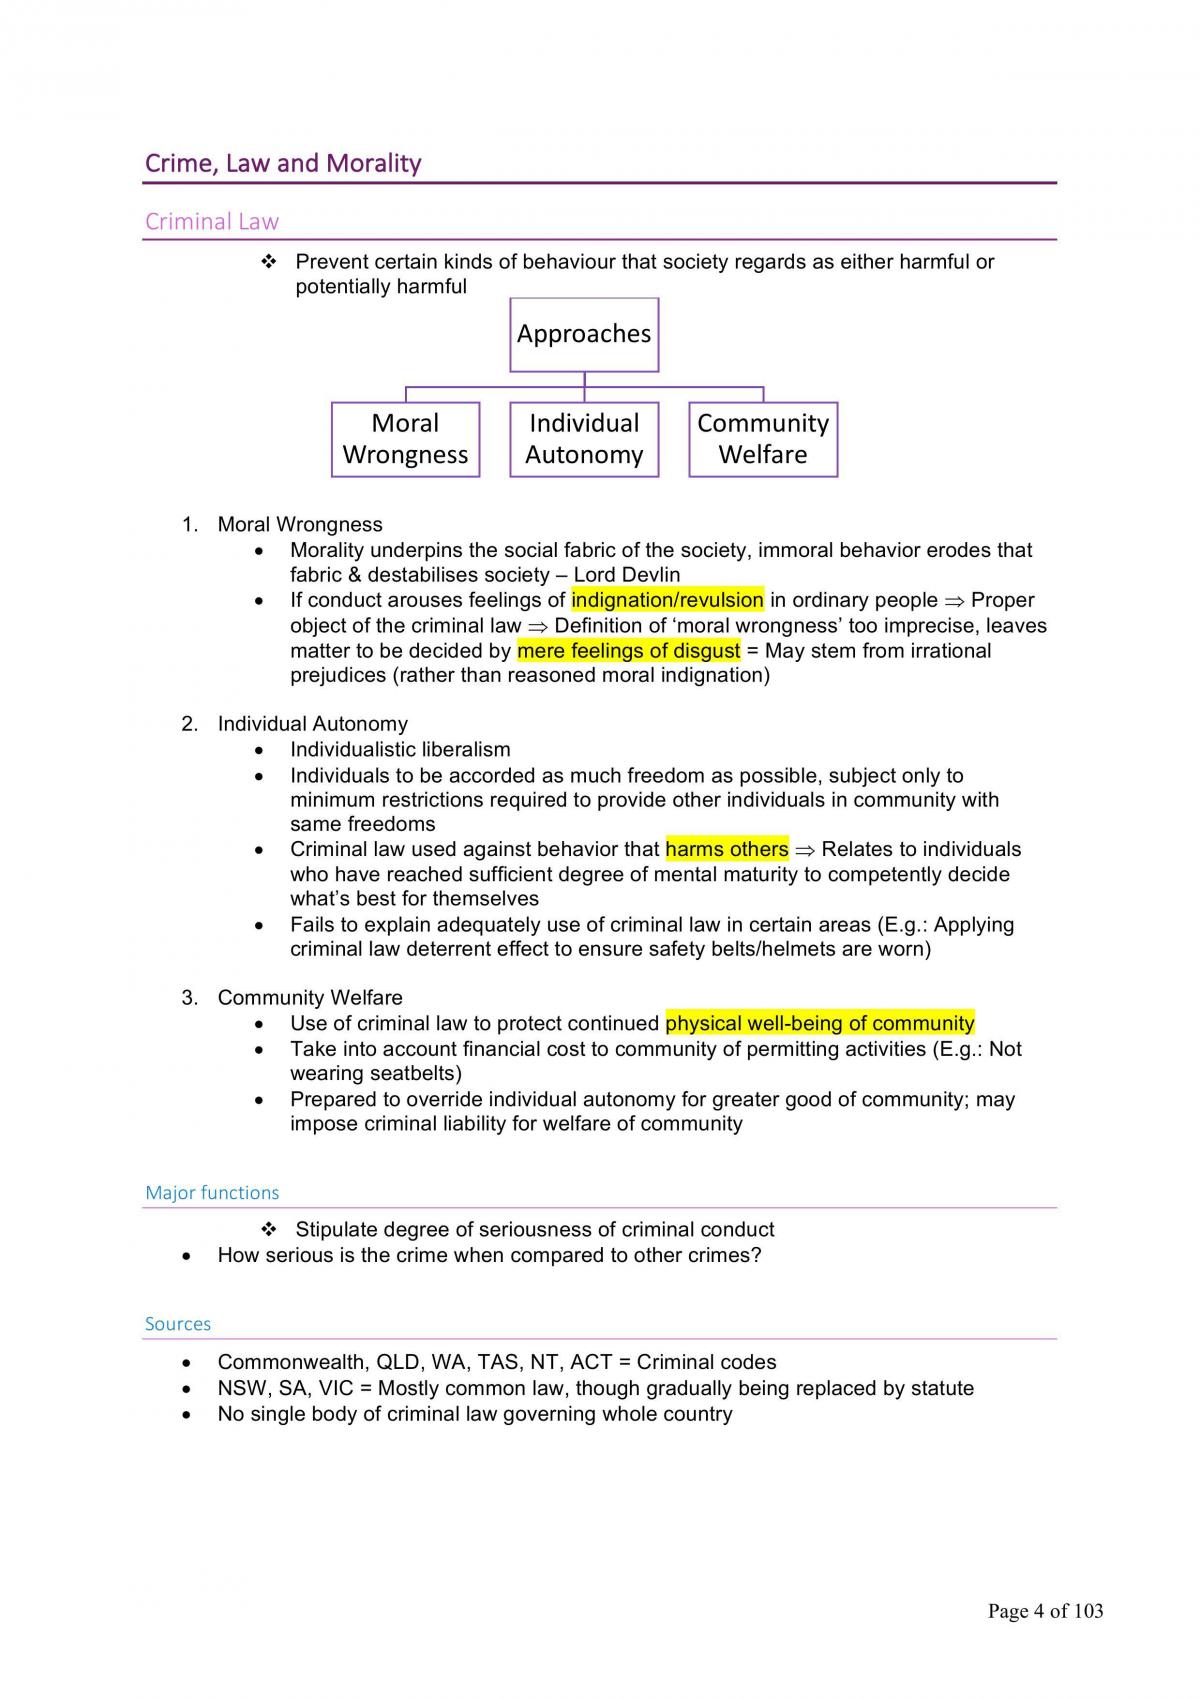 LAWS1016 Exam-Ready Notes - Page 4